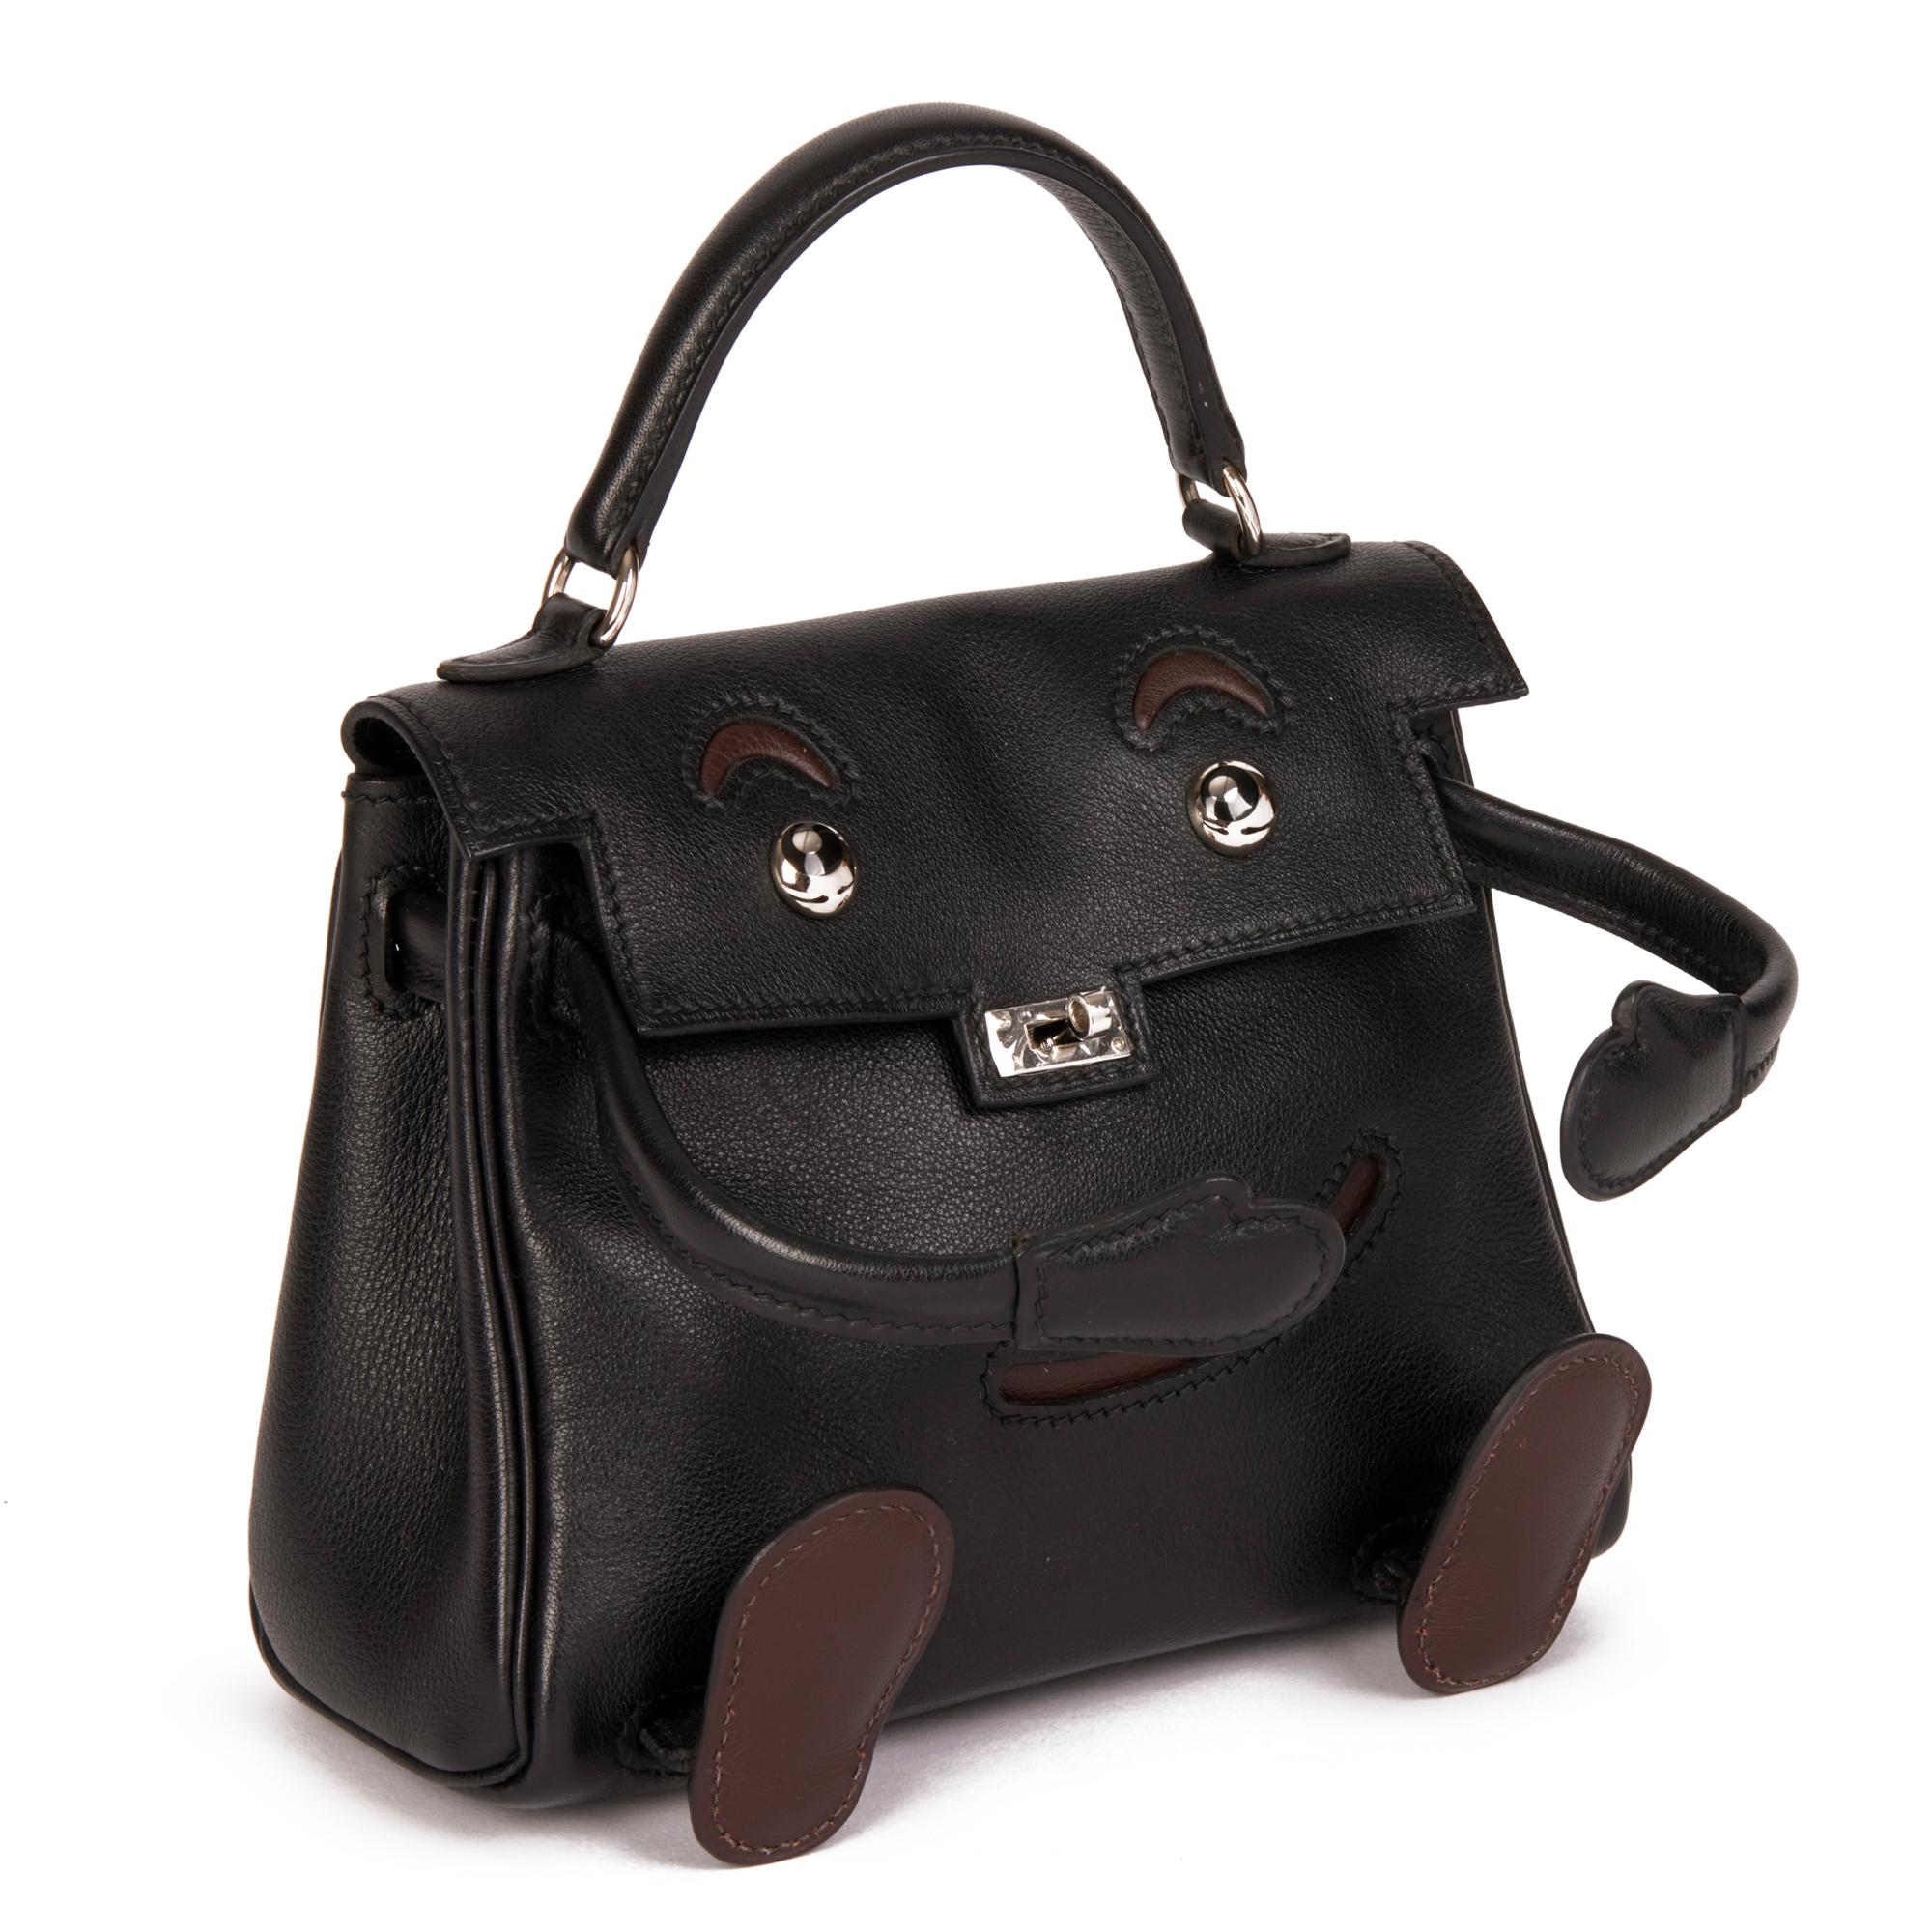 HERMÈS
Black & Chocolate Gulliver Leather Vintage Kelly Quelle Idole Doll

Serial Number: [D]
Age (Circa): 2000
Accompanied By: Hermès Dust Bag, Box
Authenticity Details: Date Stamp (Made in France)
Gender: Ladies
Type: Top Handle

Colour: Black,